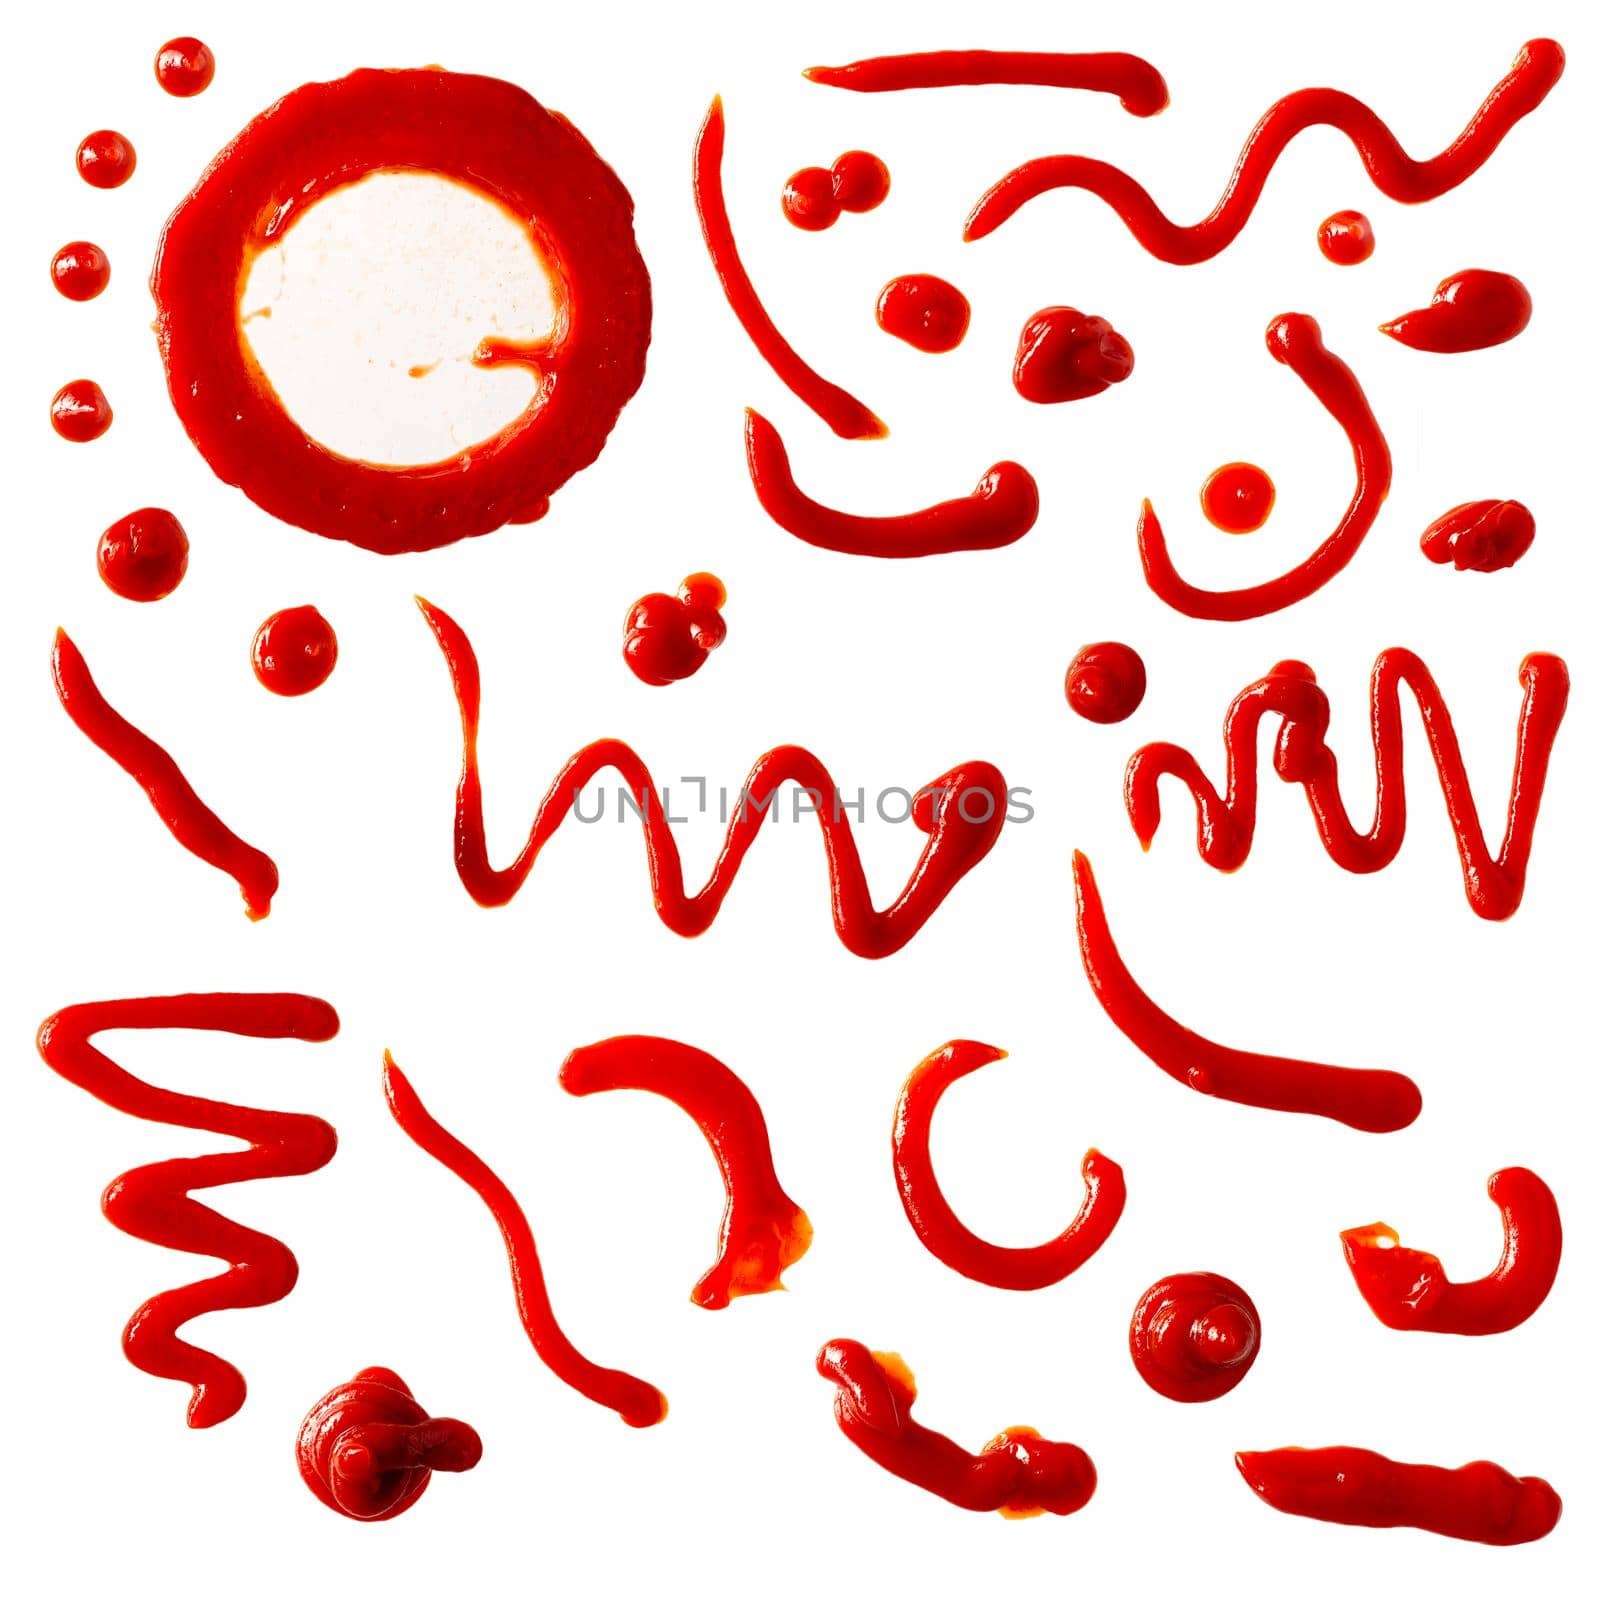 Set of Ketchup stains. Tomato sauce red spots, smears and drops isolated on white background.